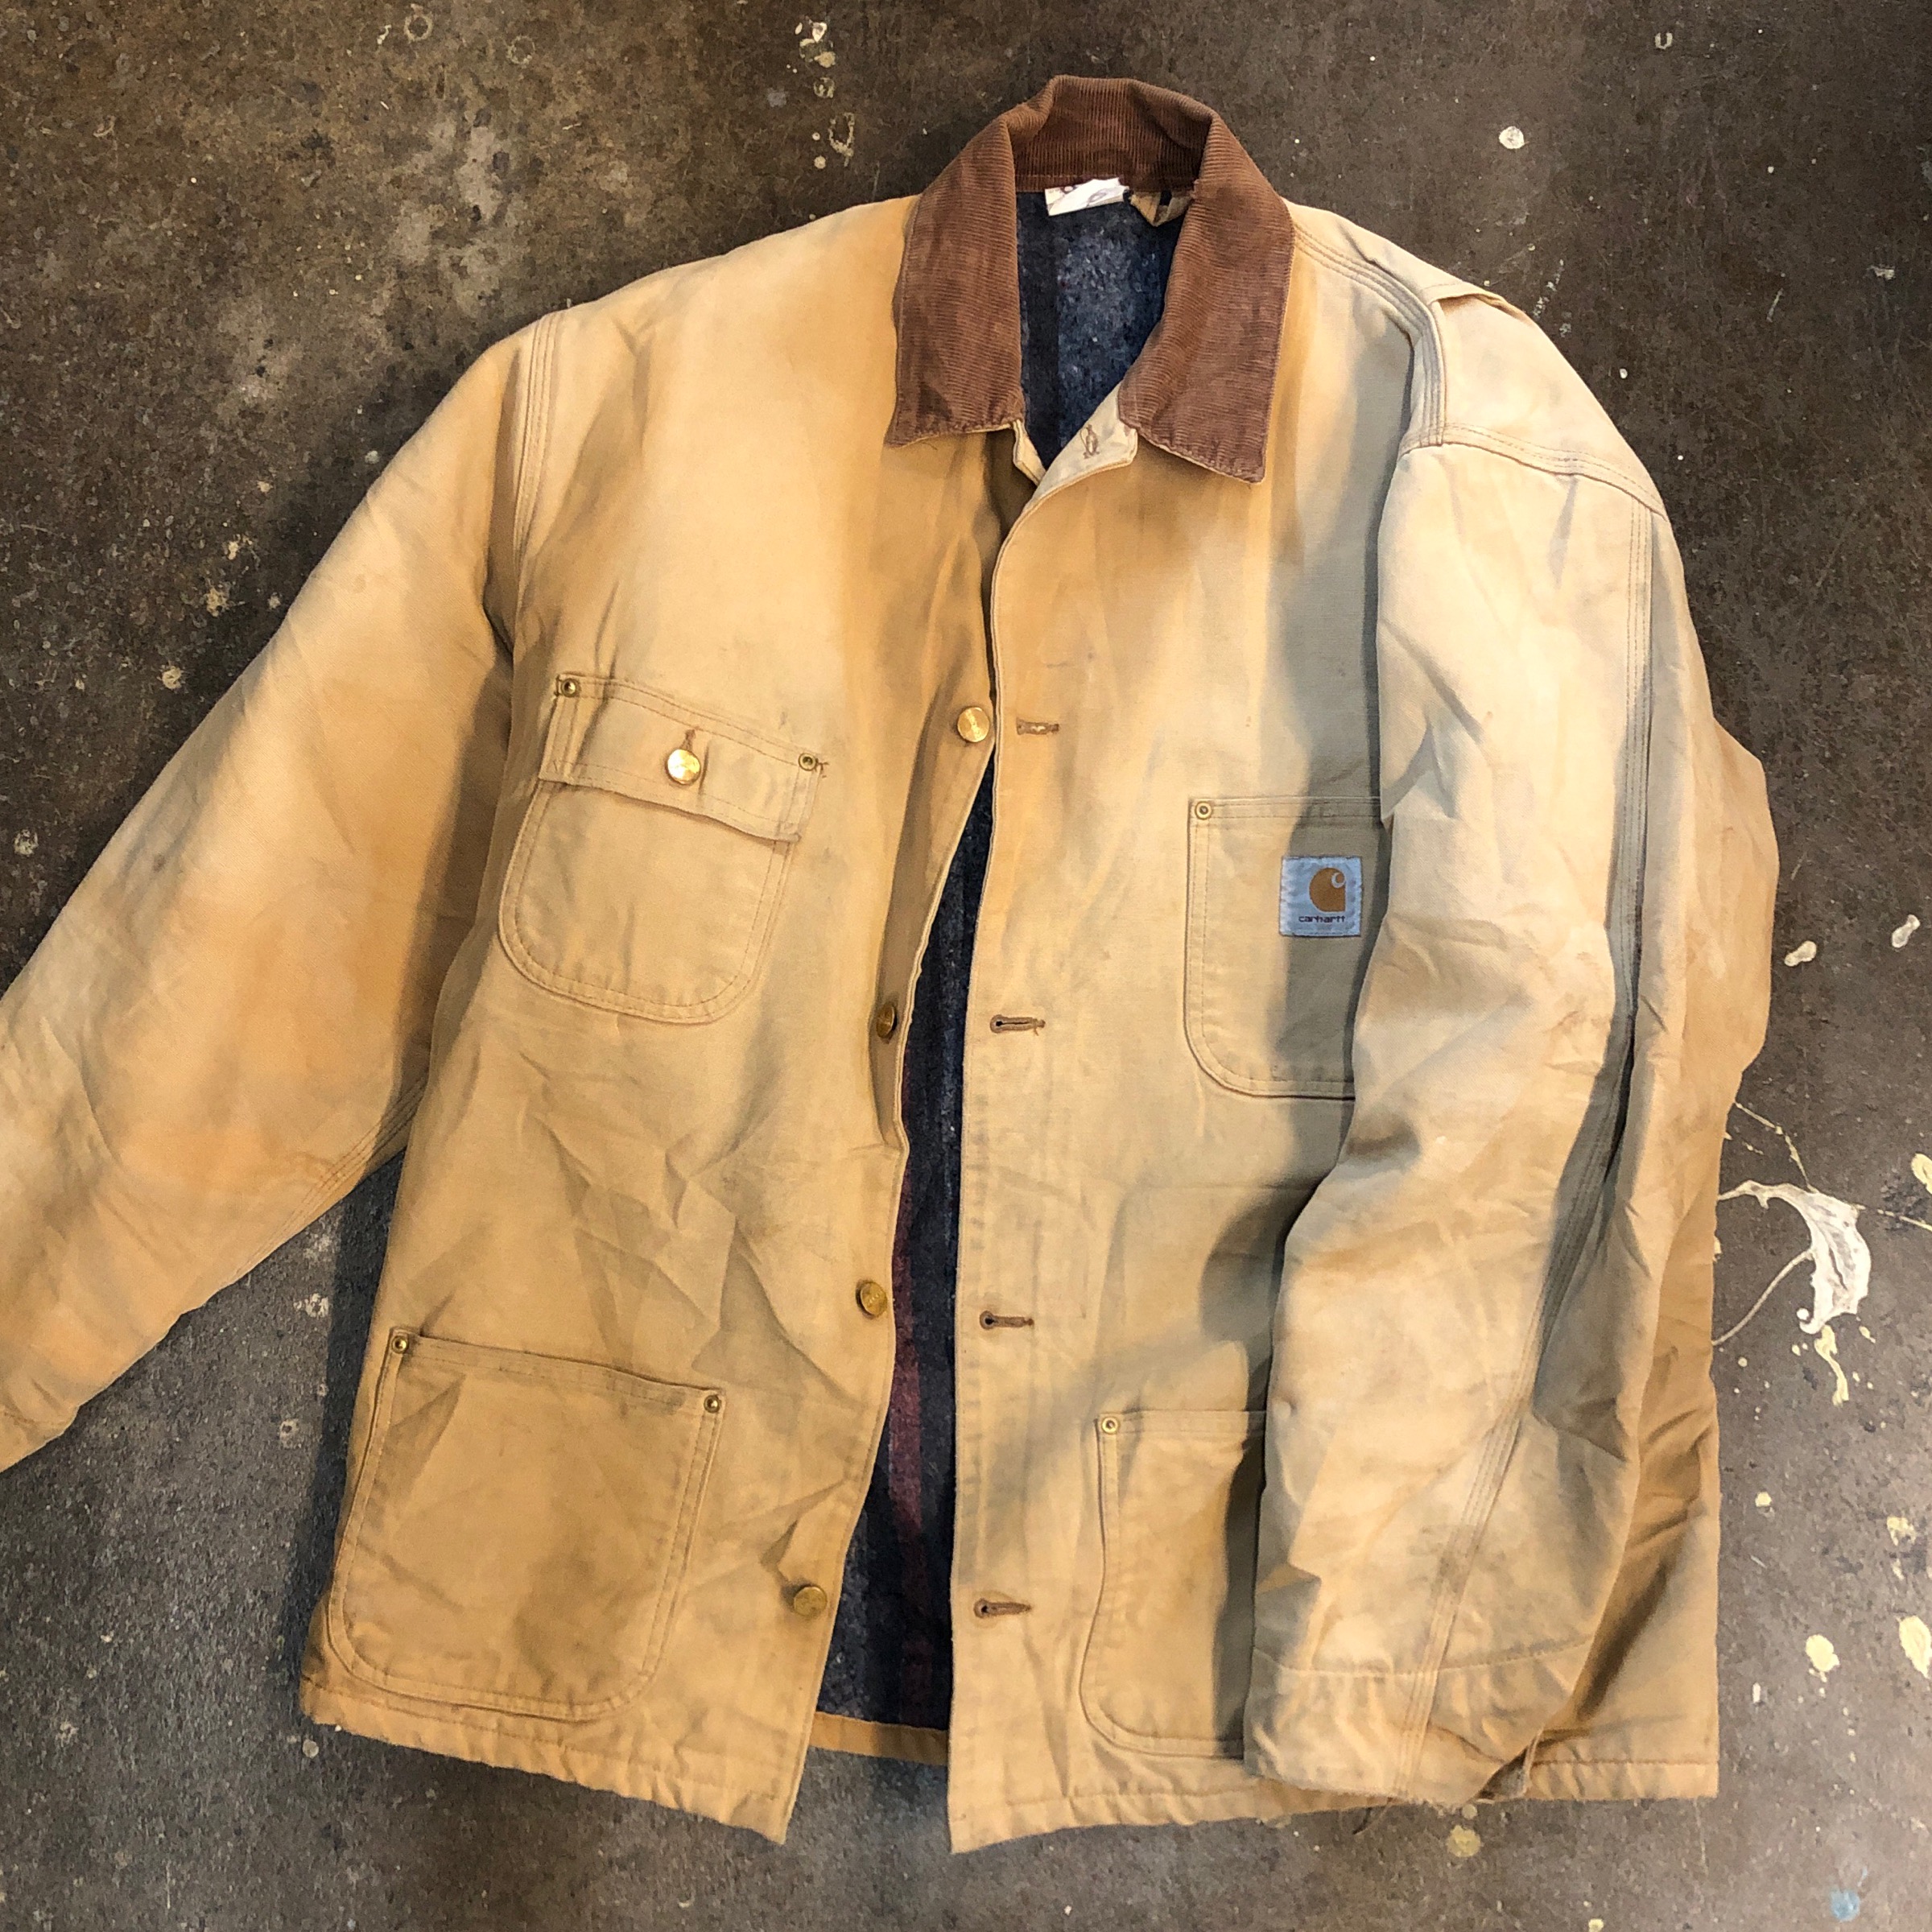 performer at opfinde Forbrydelse Carhartt Dickies Workwear Jackets By the Bundle- AVAILABLE IN THE WAREHOUSE  ONLY: Bulk Vintage Clothing